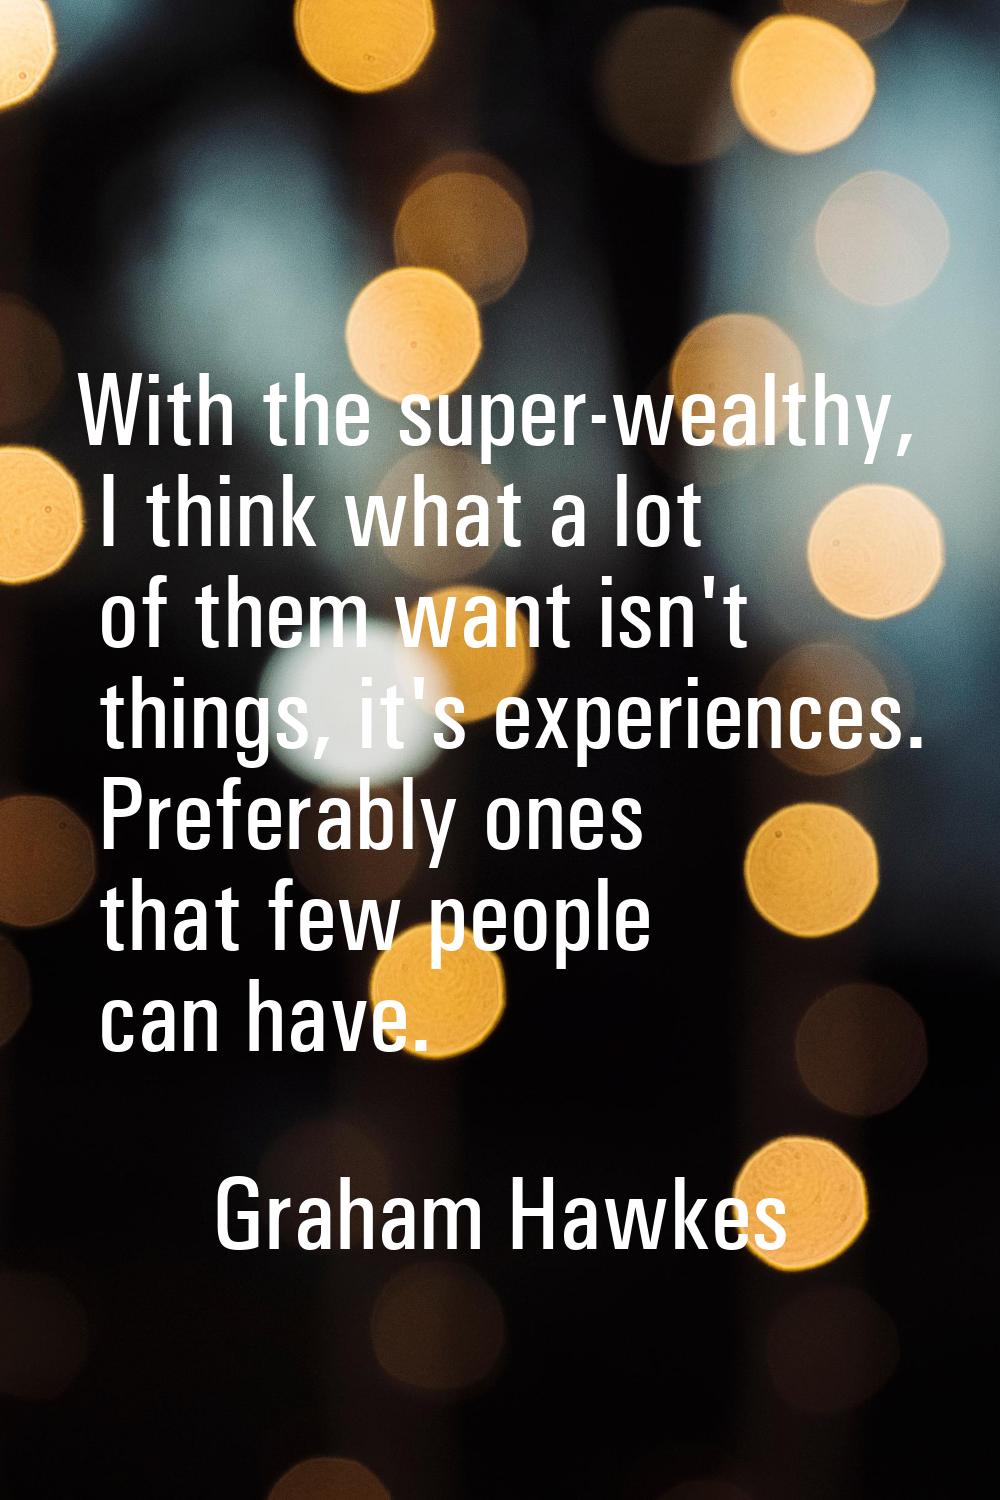 With the super-wealthy, I think what a lot of them want isn't things, it's experiences. Preferably 